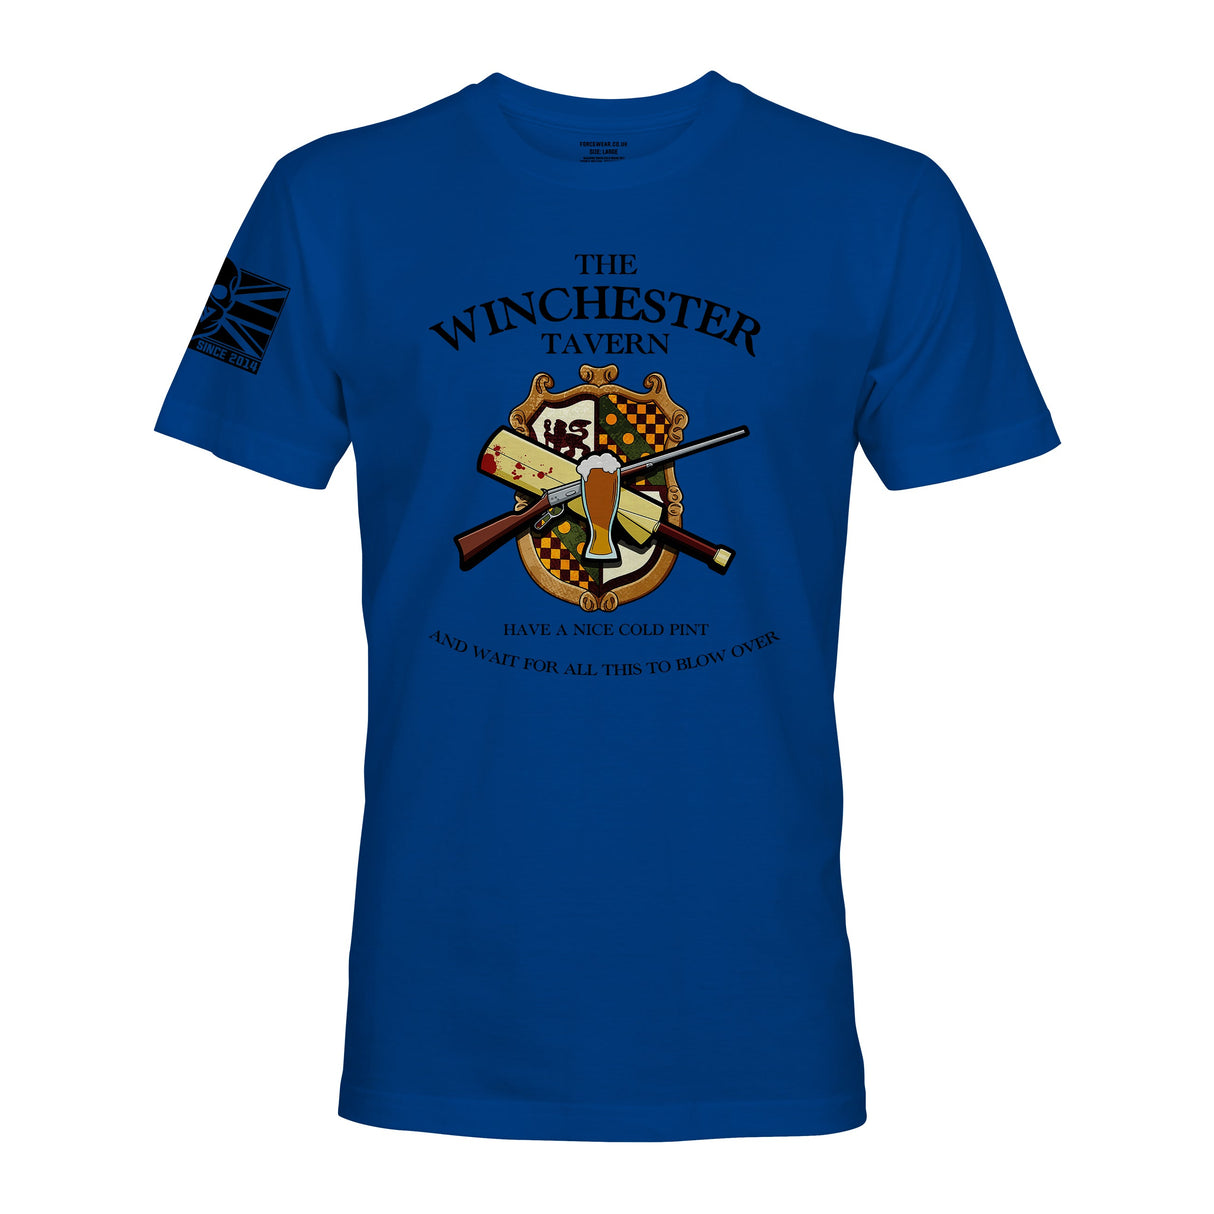 THE WINCHESTER TAVERN - Force Wear HQ - T-SHIRTS